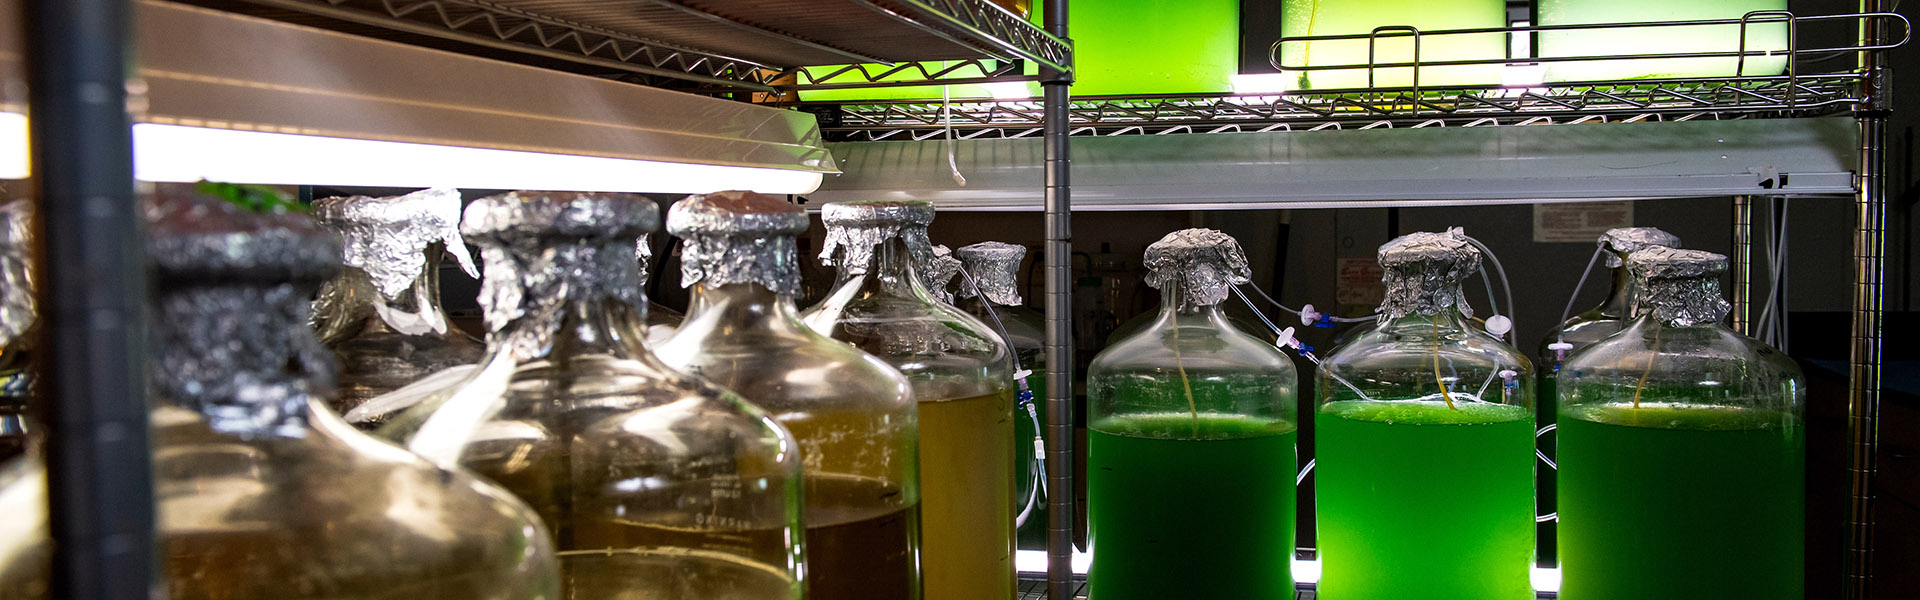 Foil-covered Canisters Growing Green Algae